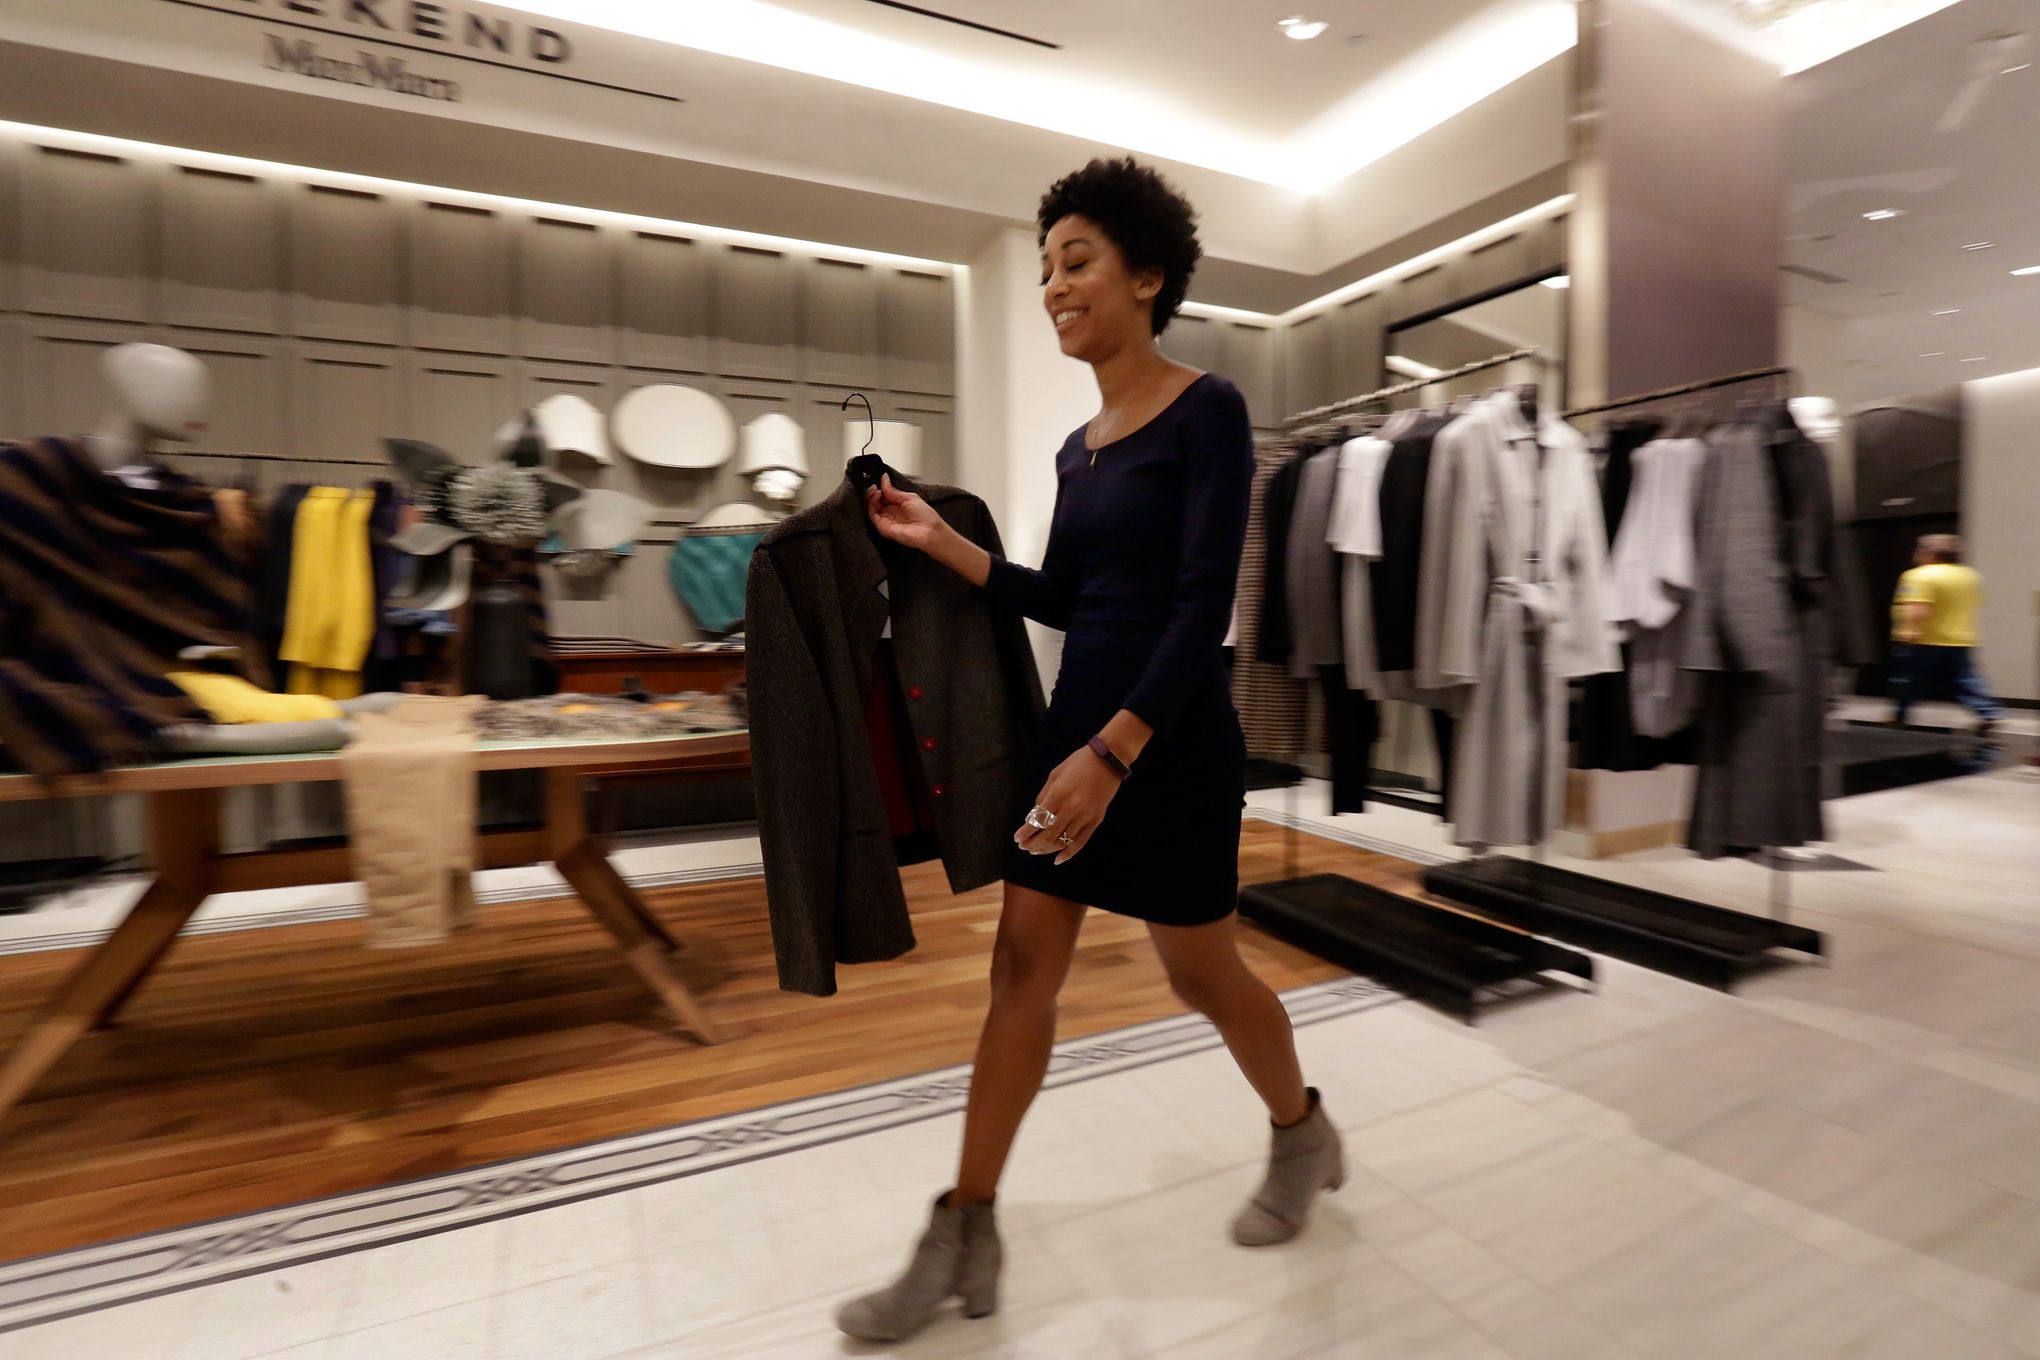 Neiman Marcus to Close Outlet Stores in Luxury Focus - Bloomberg